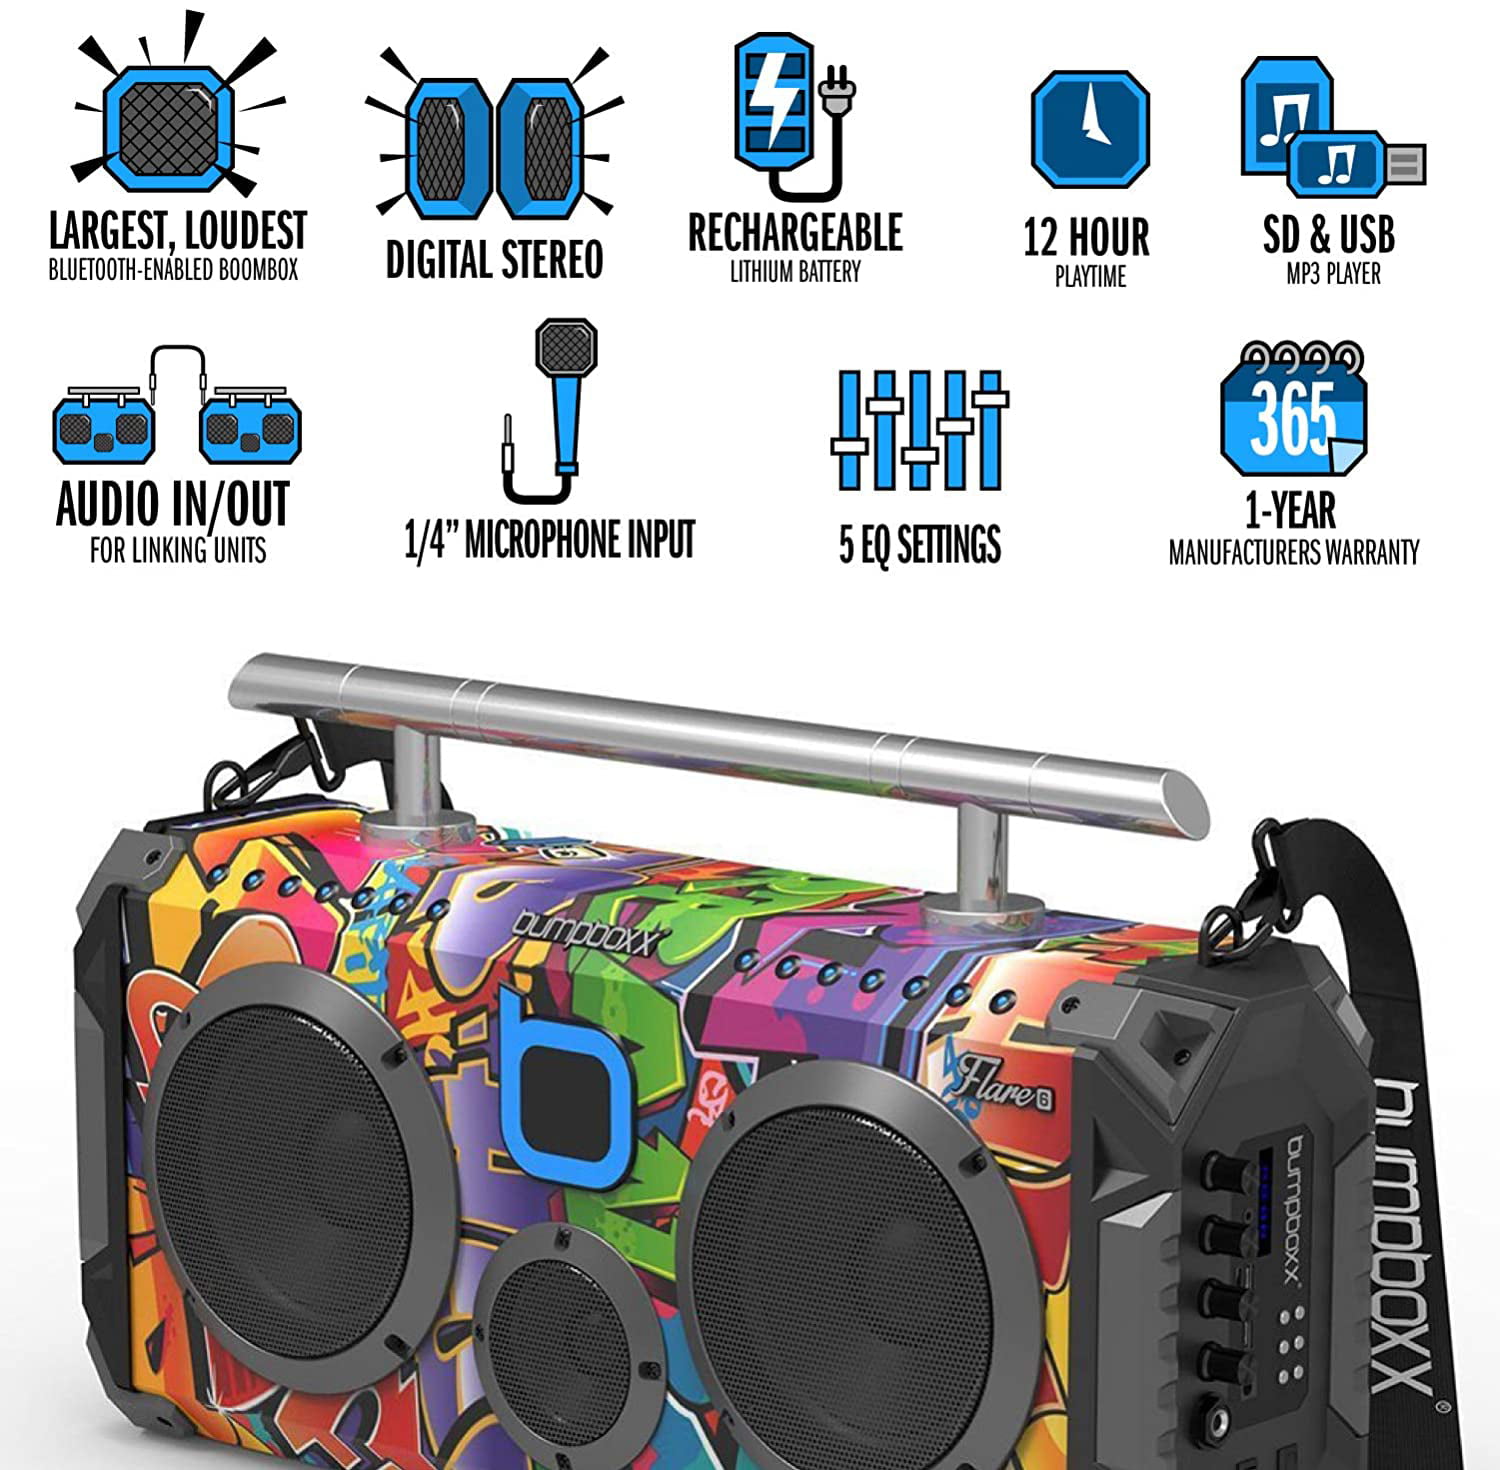 Bumpboxx Bluetooth Boombox Flare6 NYC Graffiti Retro Boombox with Bluetooth Speaker Rechargeable Bluetooth Speaker